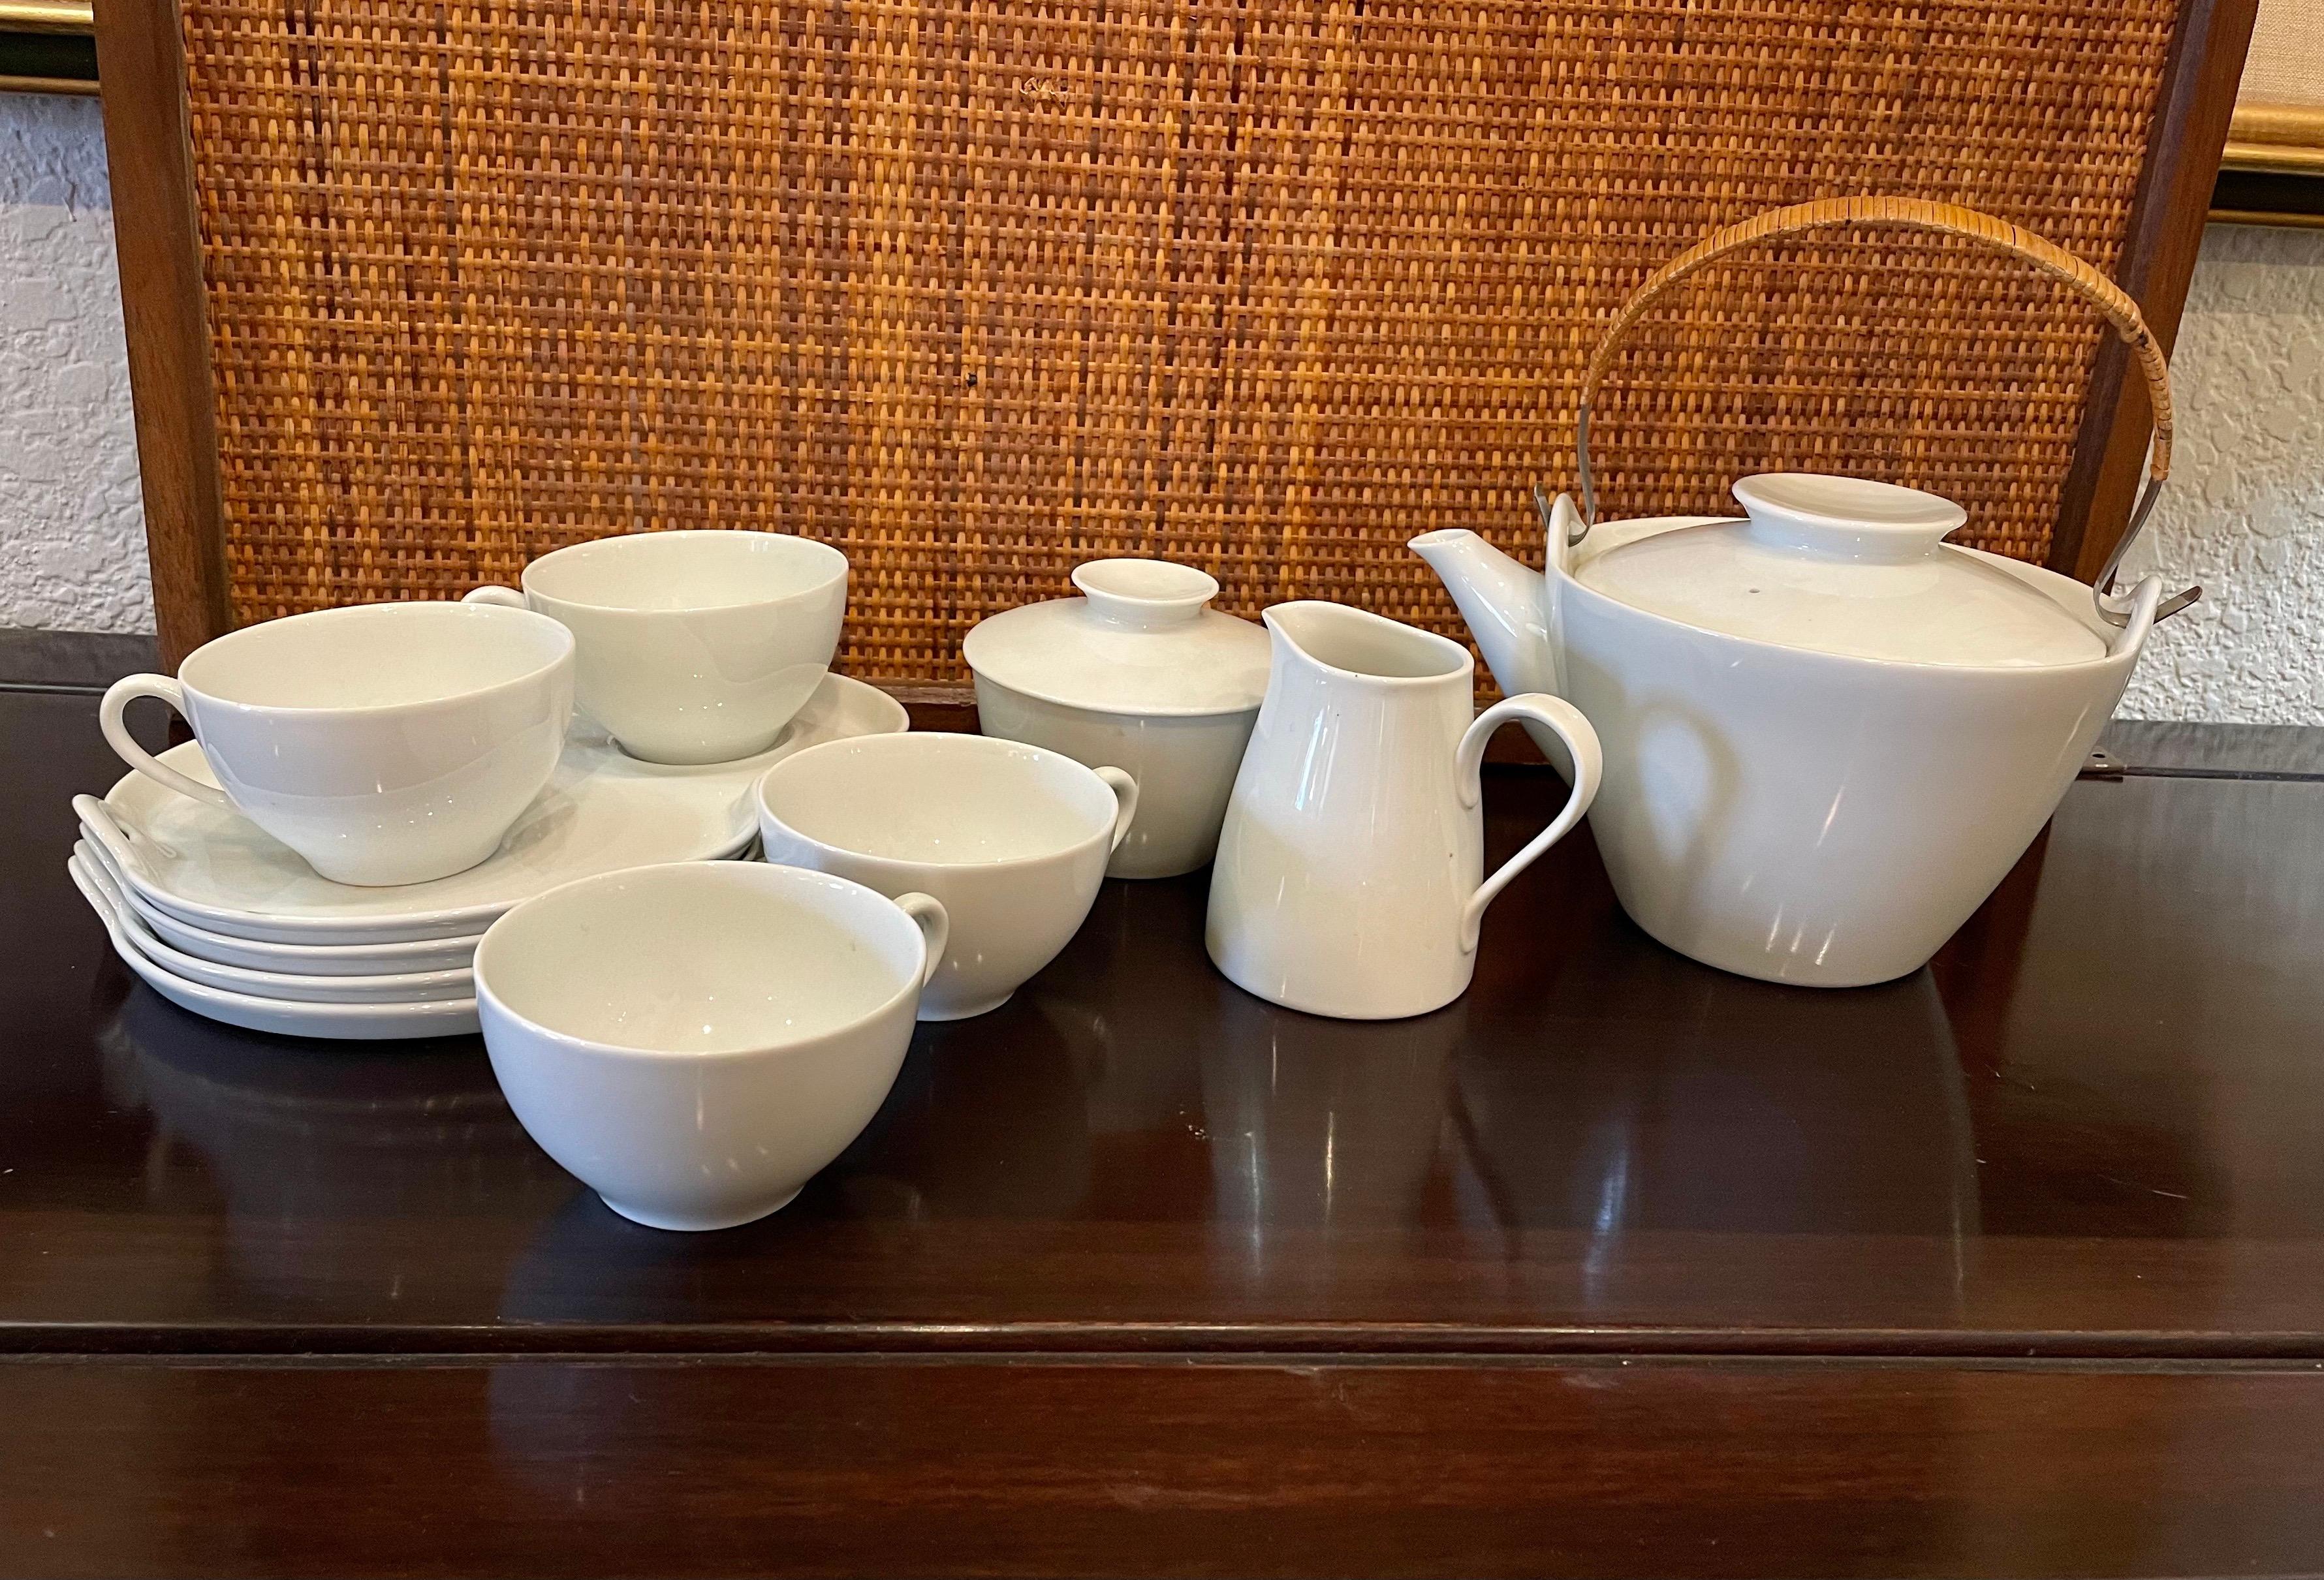 Beautiful and rare set of coffee tea for 4 great condition circa 1963 in white porcelain great condition like new, no chips or cracks, 4 snack plates - 8.5